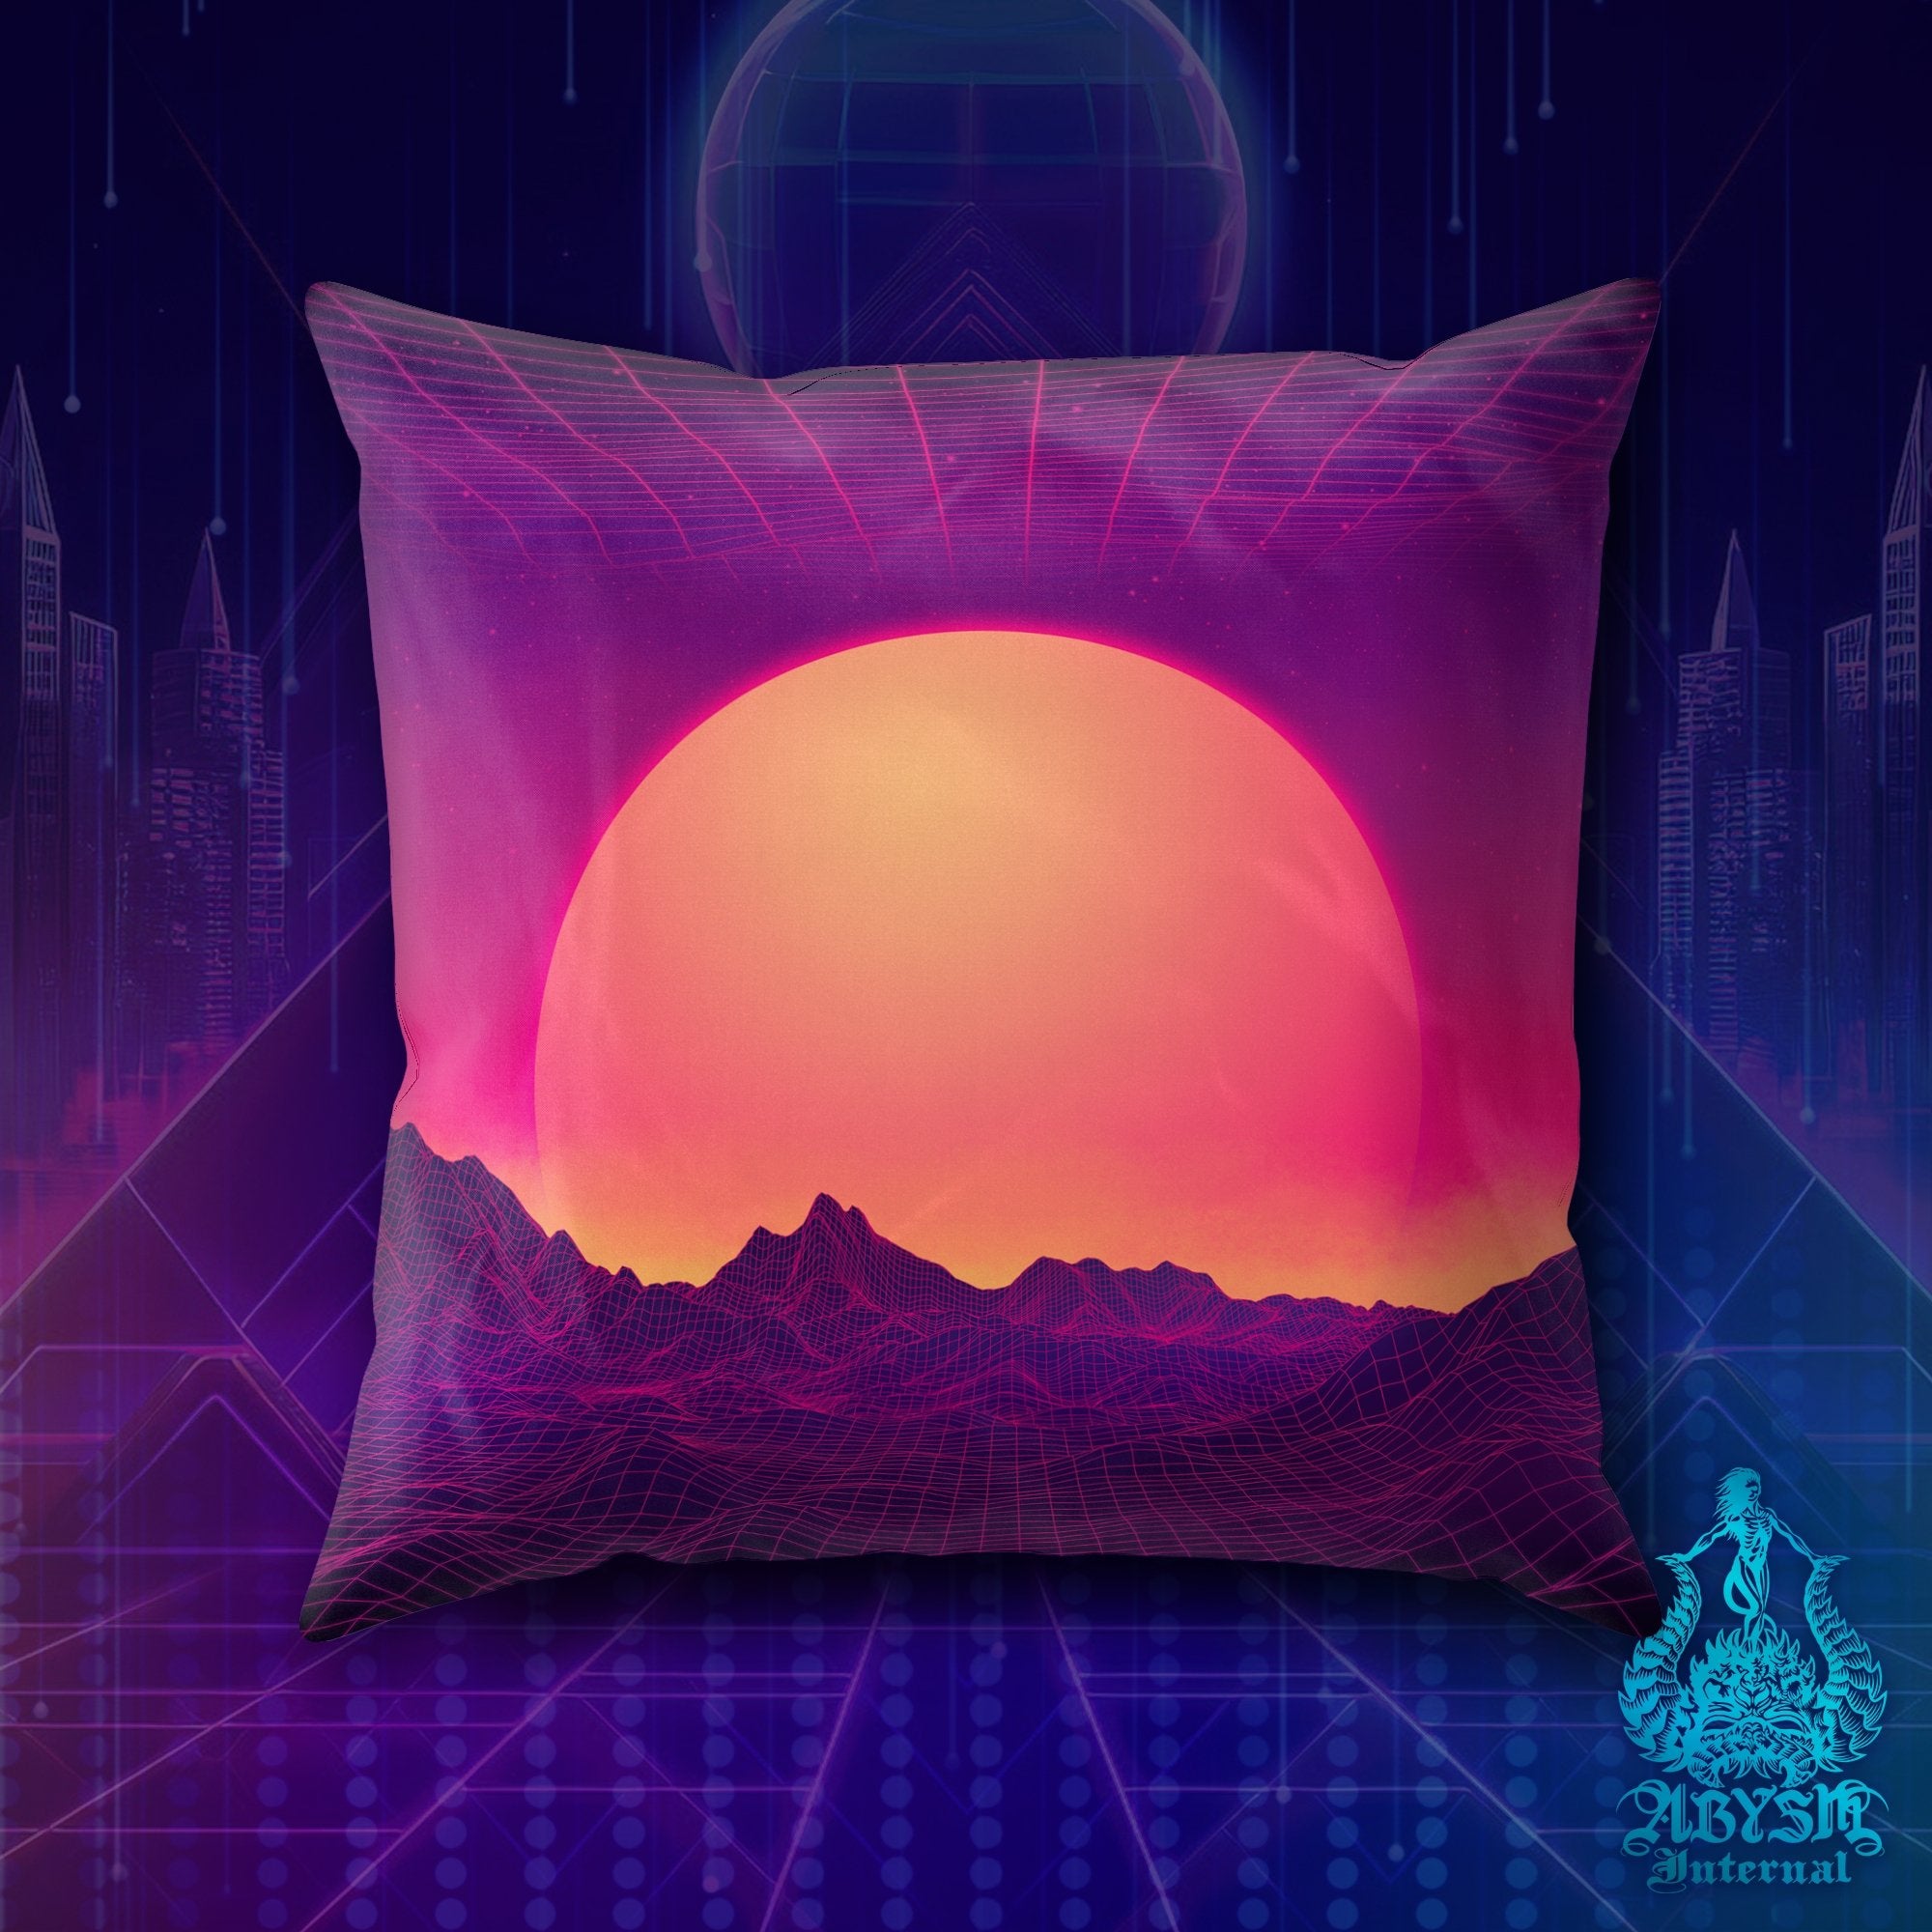 Vaporwave Throw Pillow, Psychedelic Decorative Accent Cushion, Synthwave Home Decor, Retrowave 80s Room - Sunset - Abysm Internal